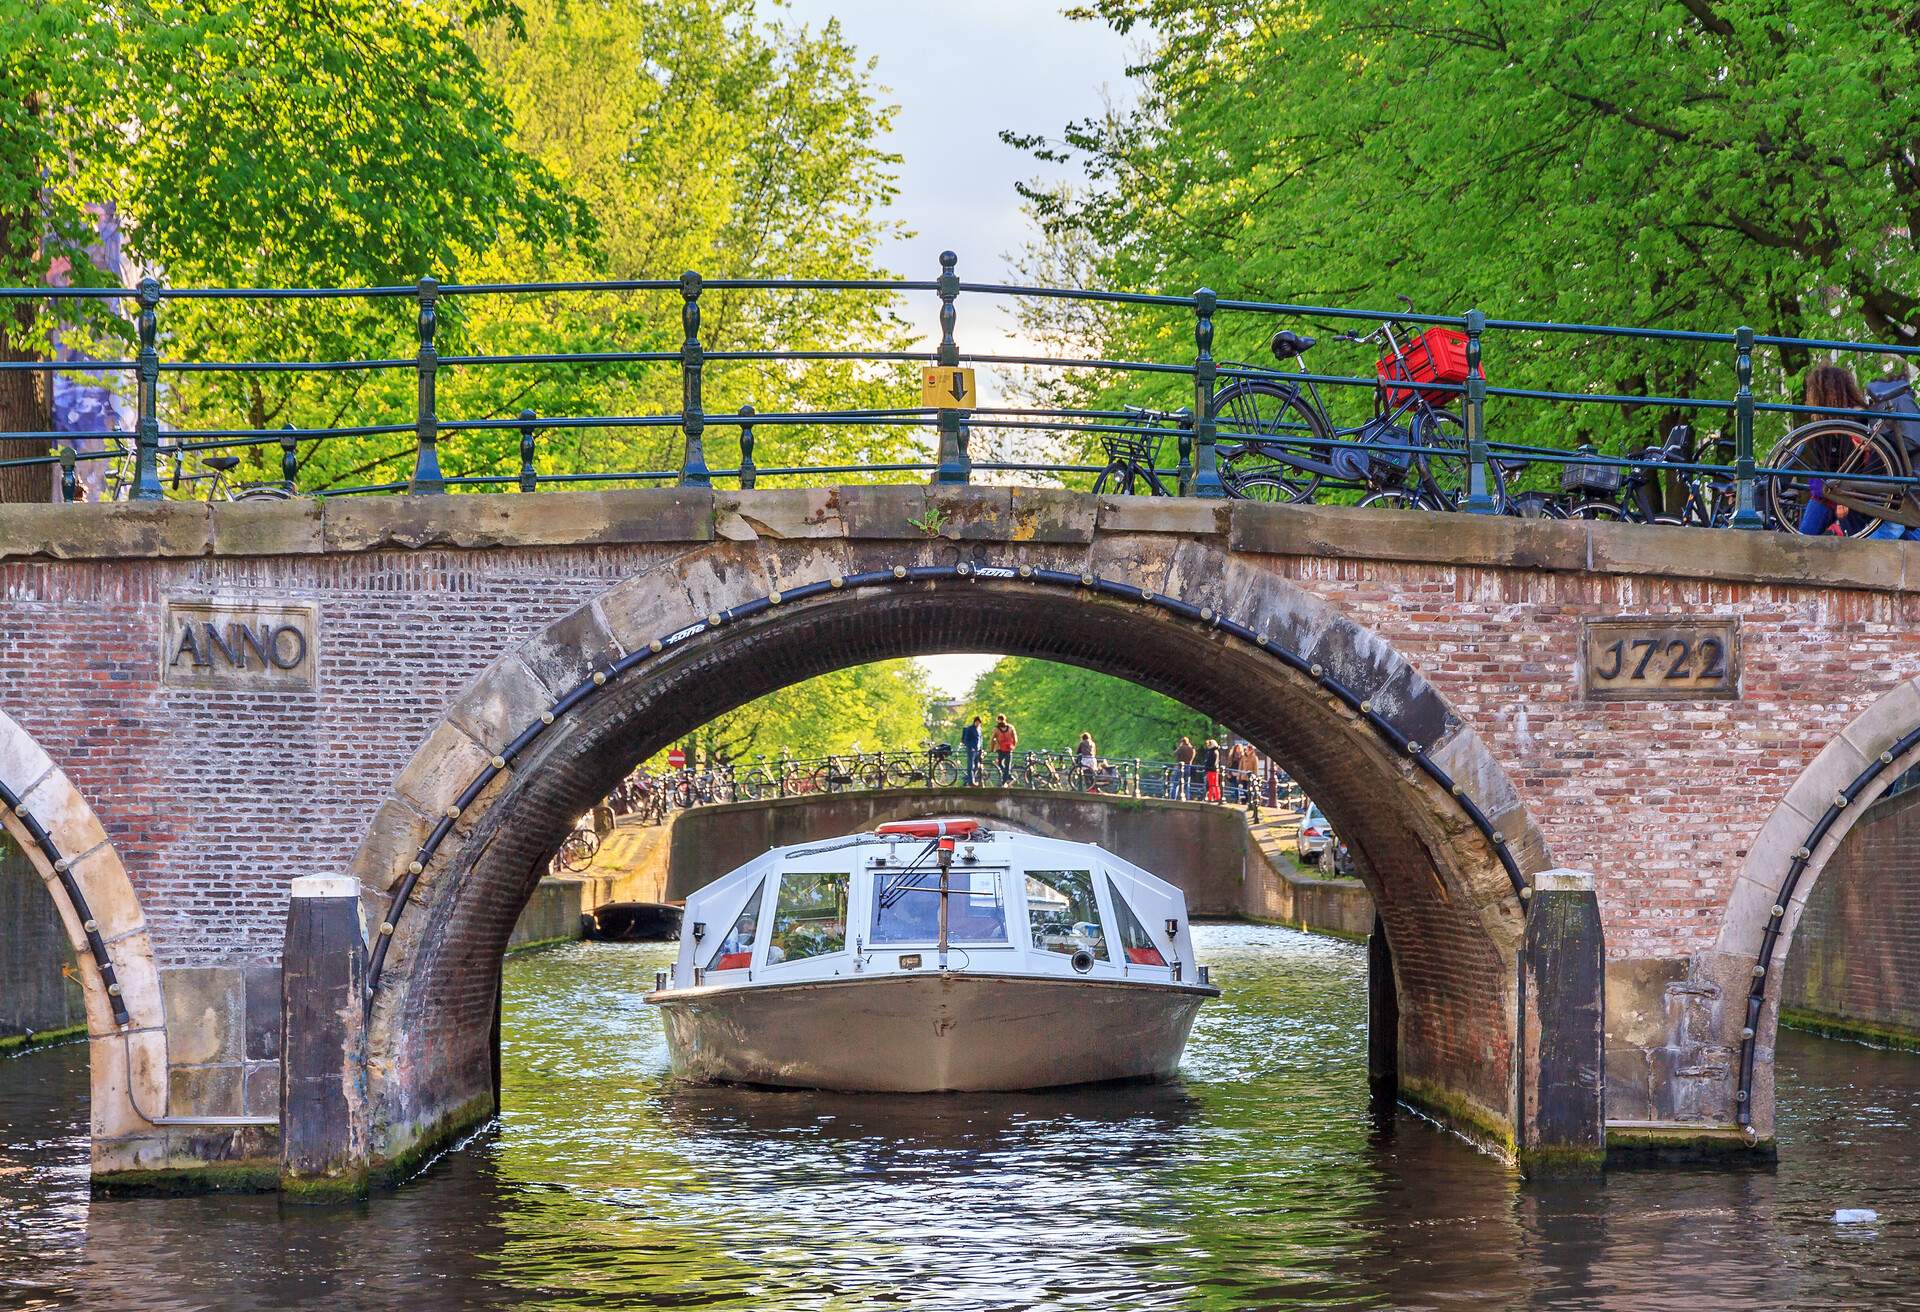 A canal boat with passengers about to pass through an arch bridge.